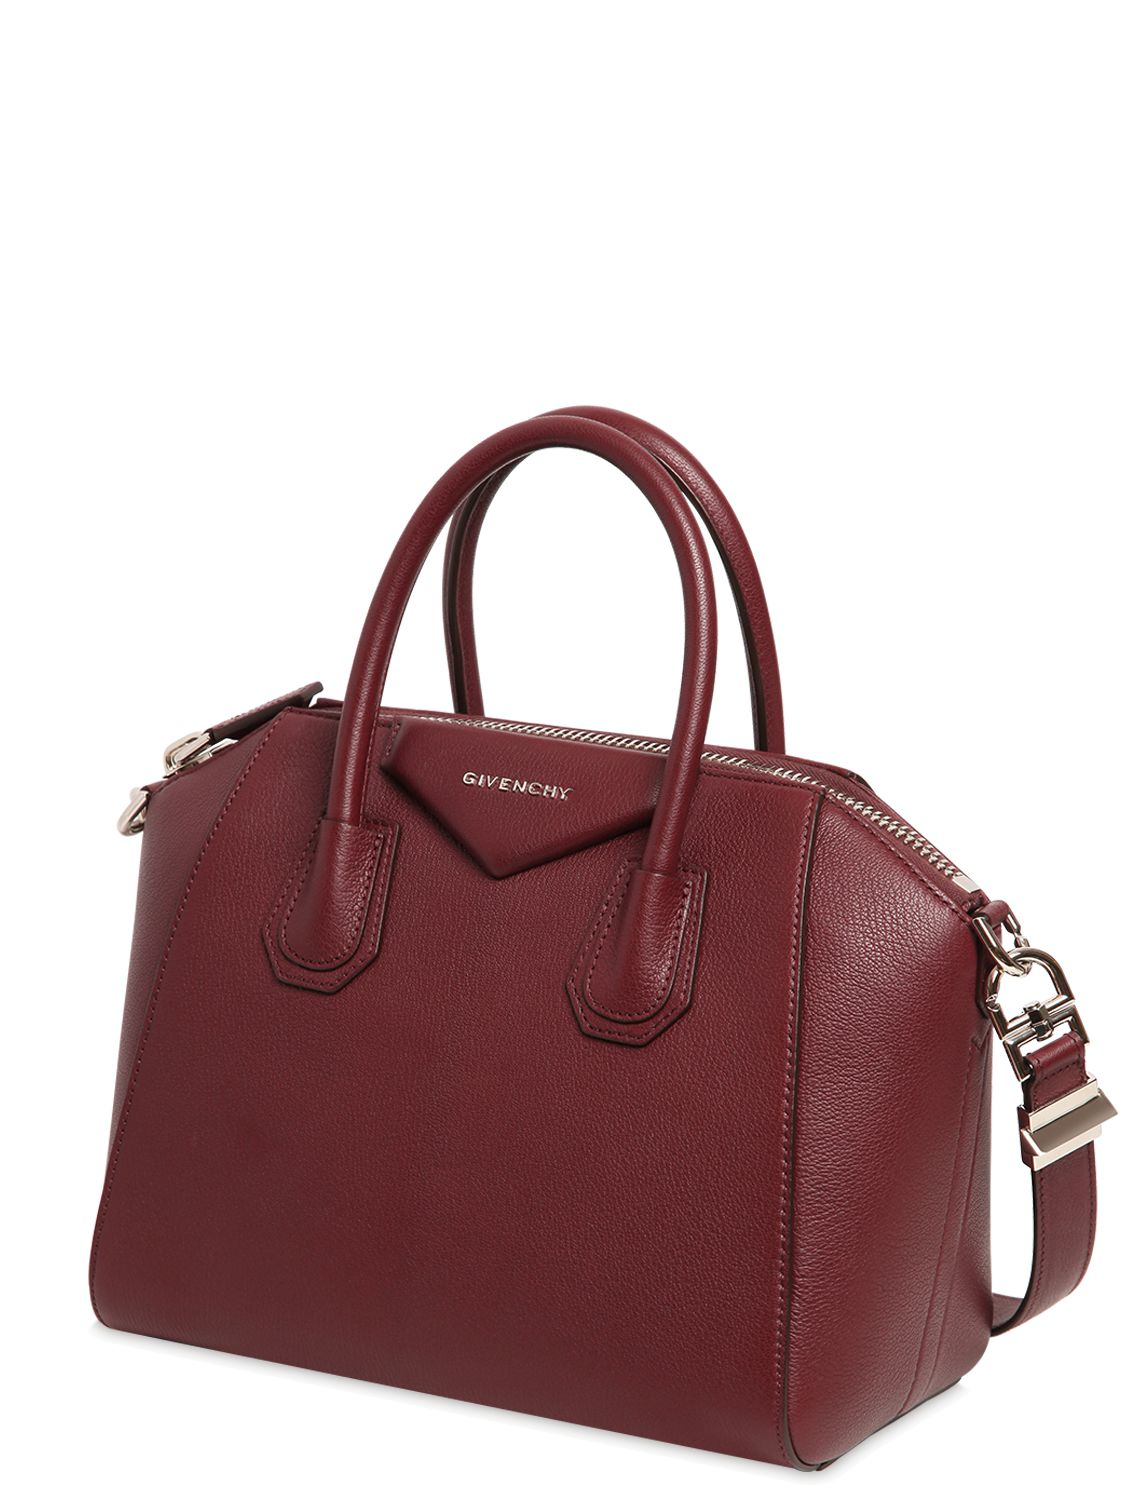 Lyst - Givenchy Small Antigona Grained Leather Bag in Brown